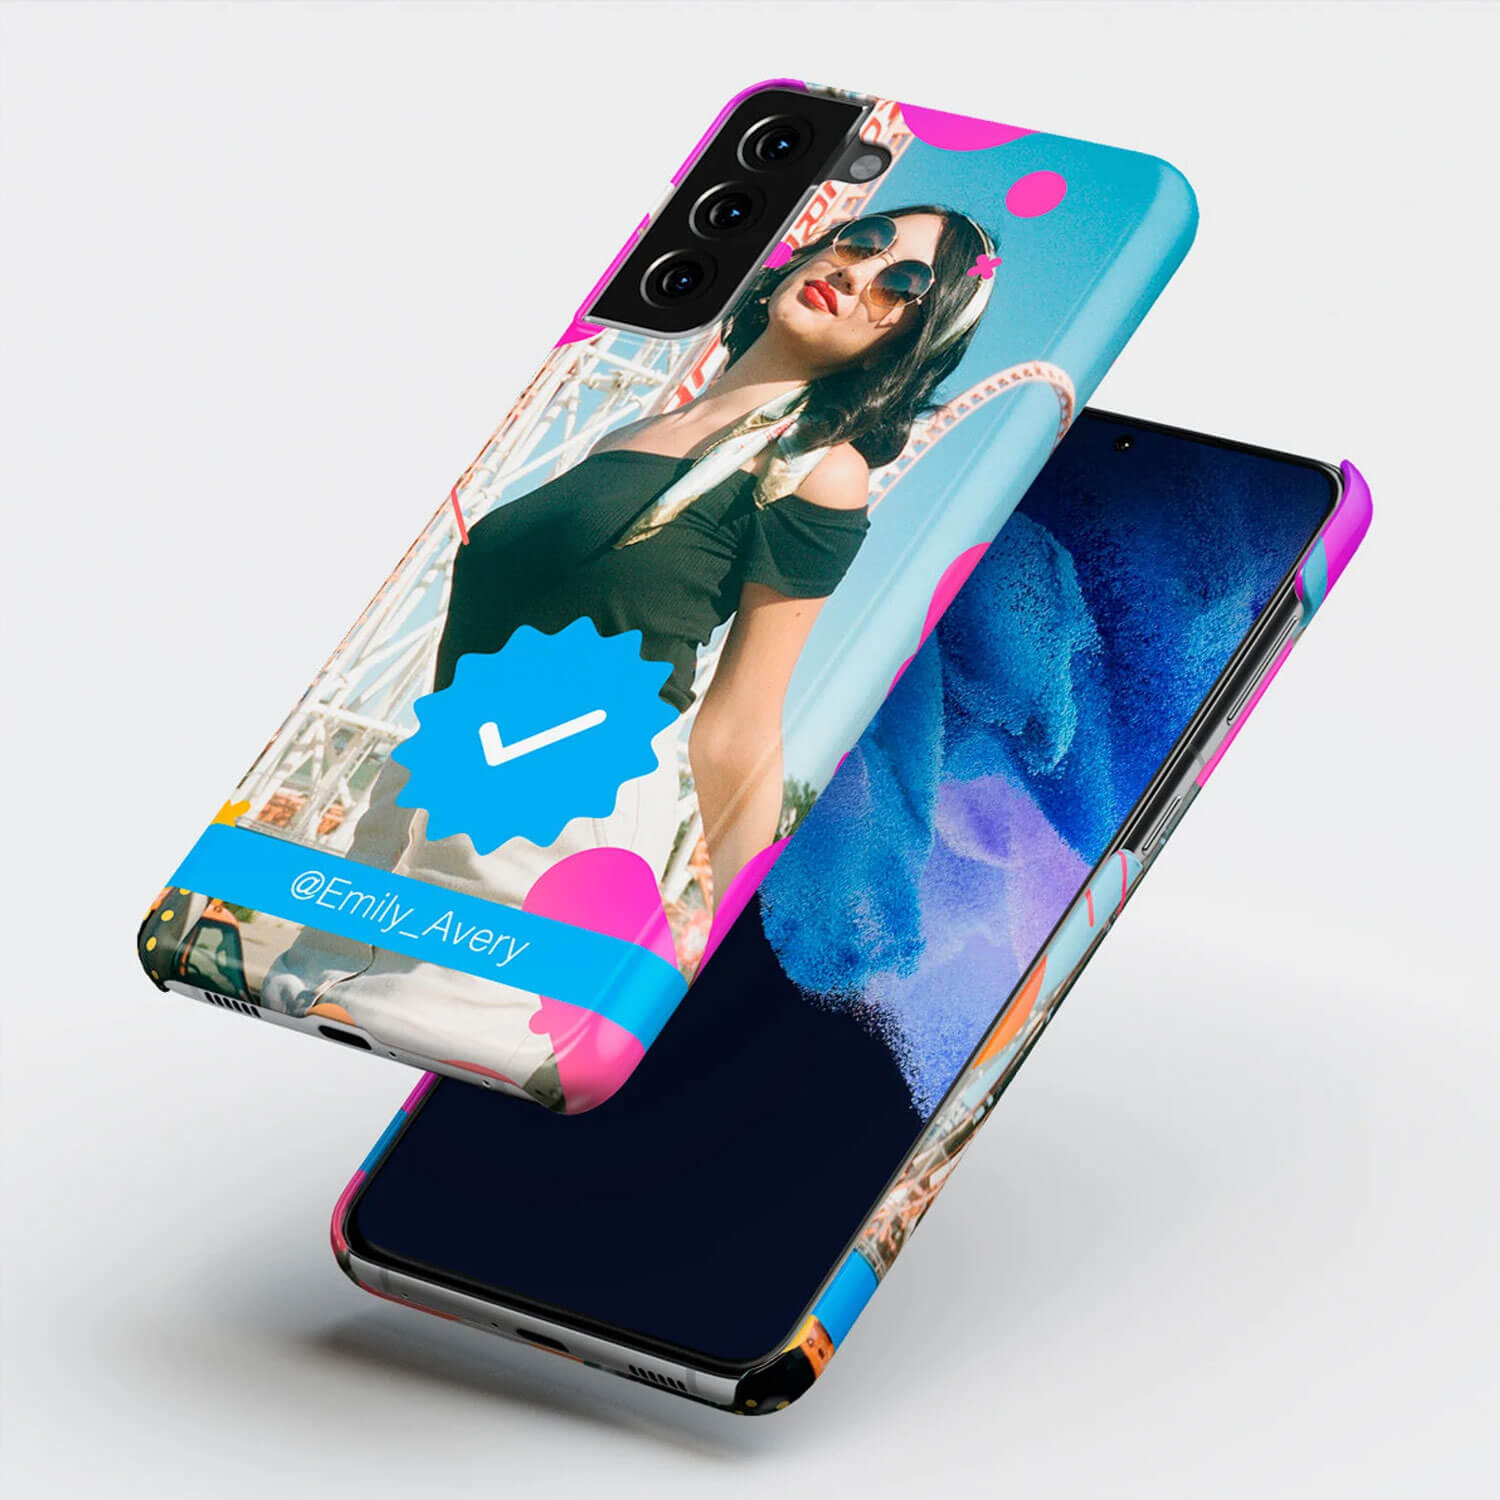 Wrappz phone case with personalised image of a woman in front of a rollercoaster, and a verified blue tick symbol and twitter handle over the image.